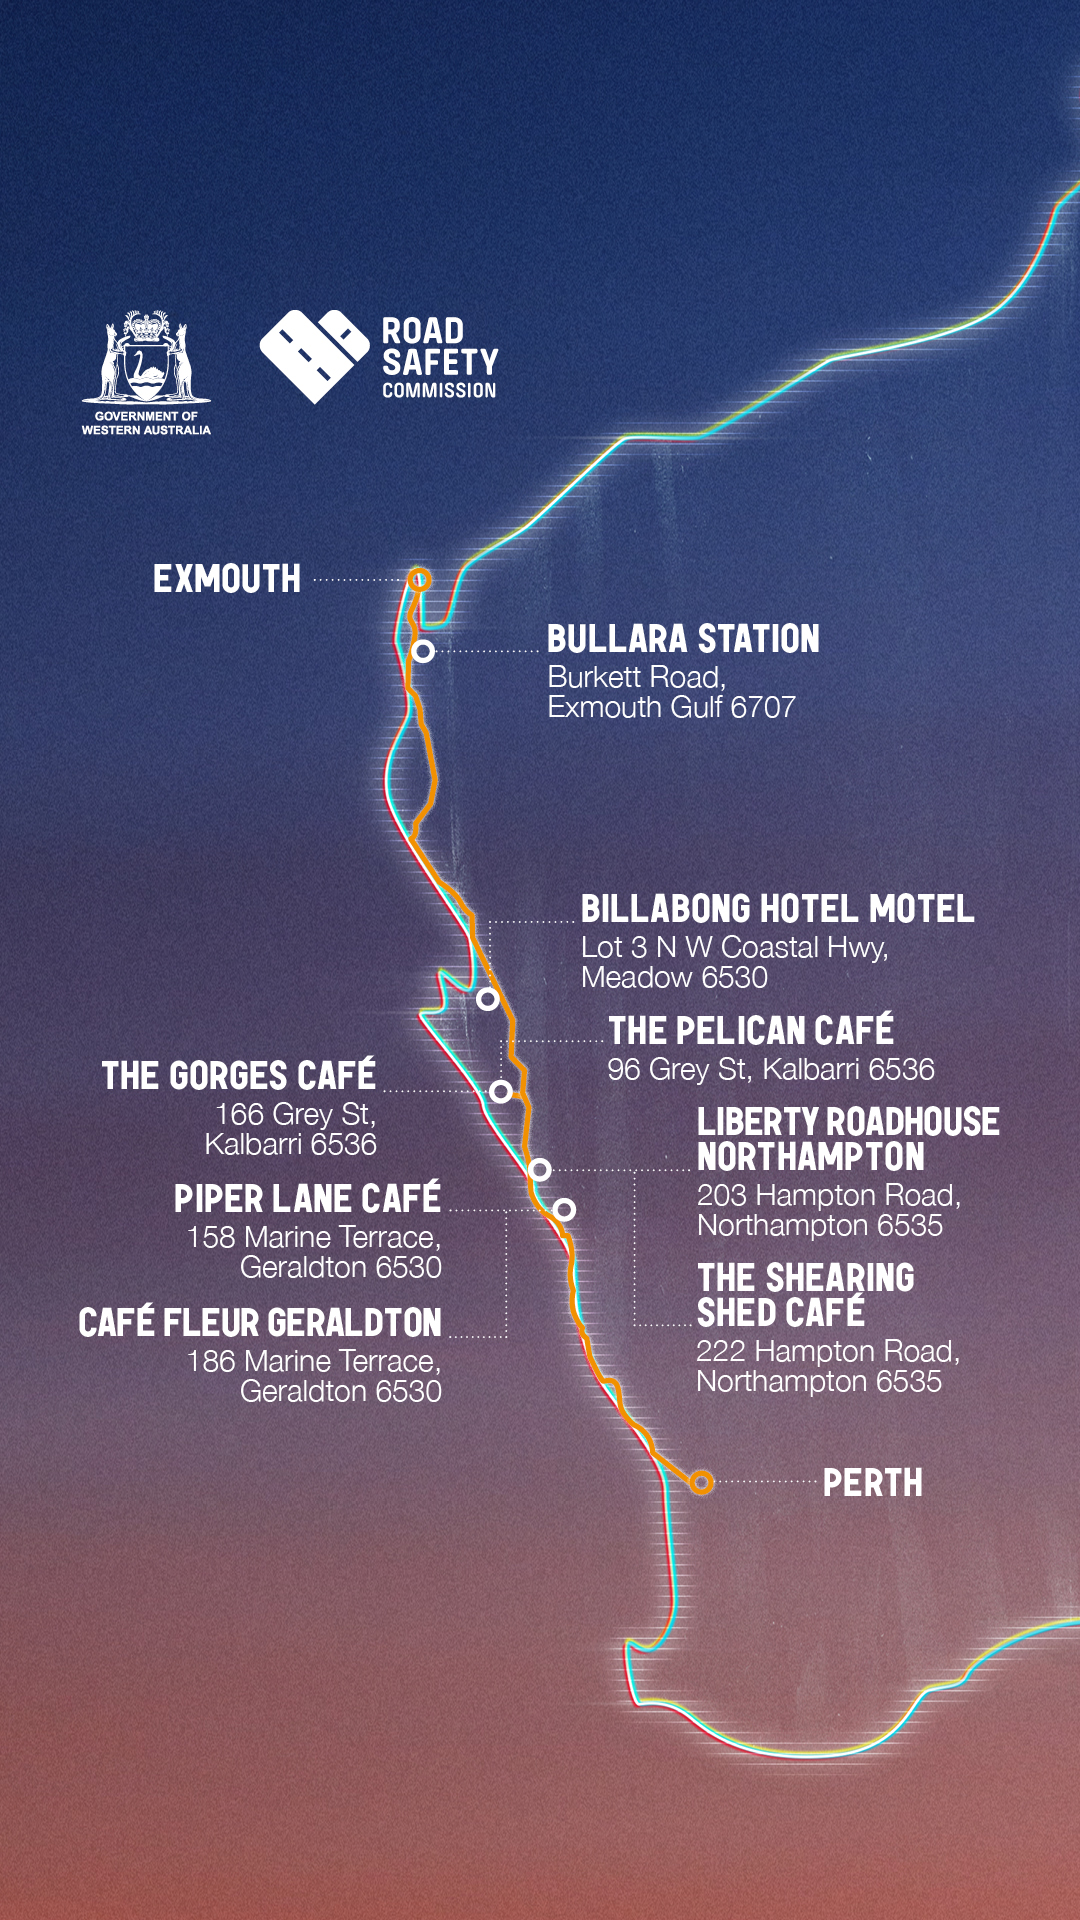 A map showing locations of coffee shops on the way to Exmouth from Perth